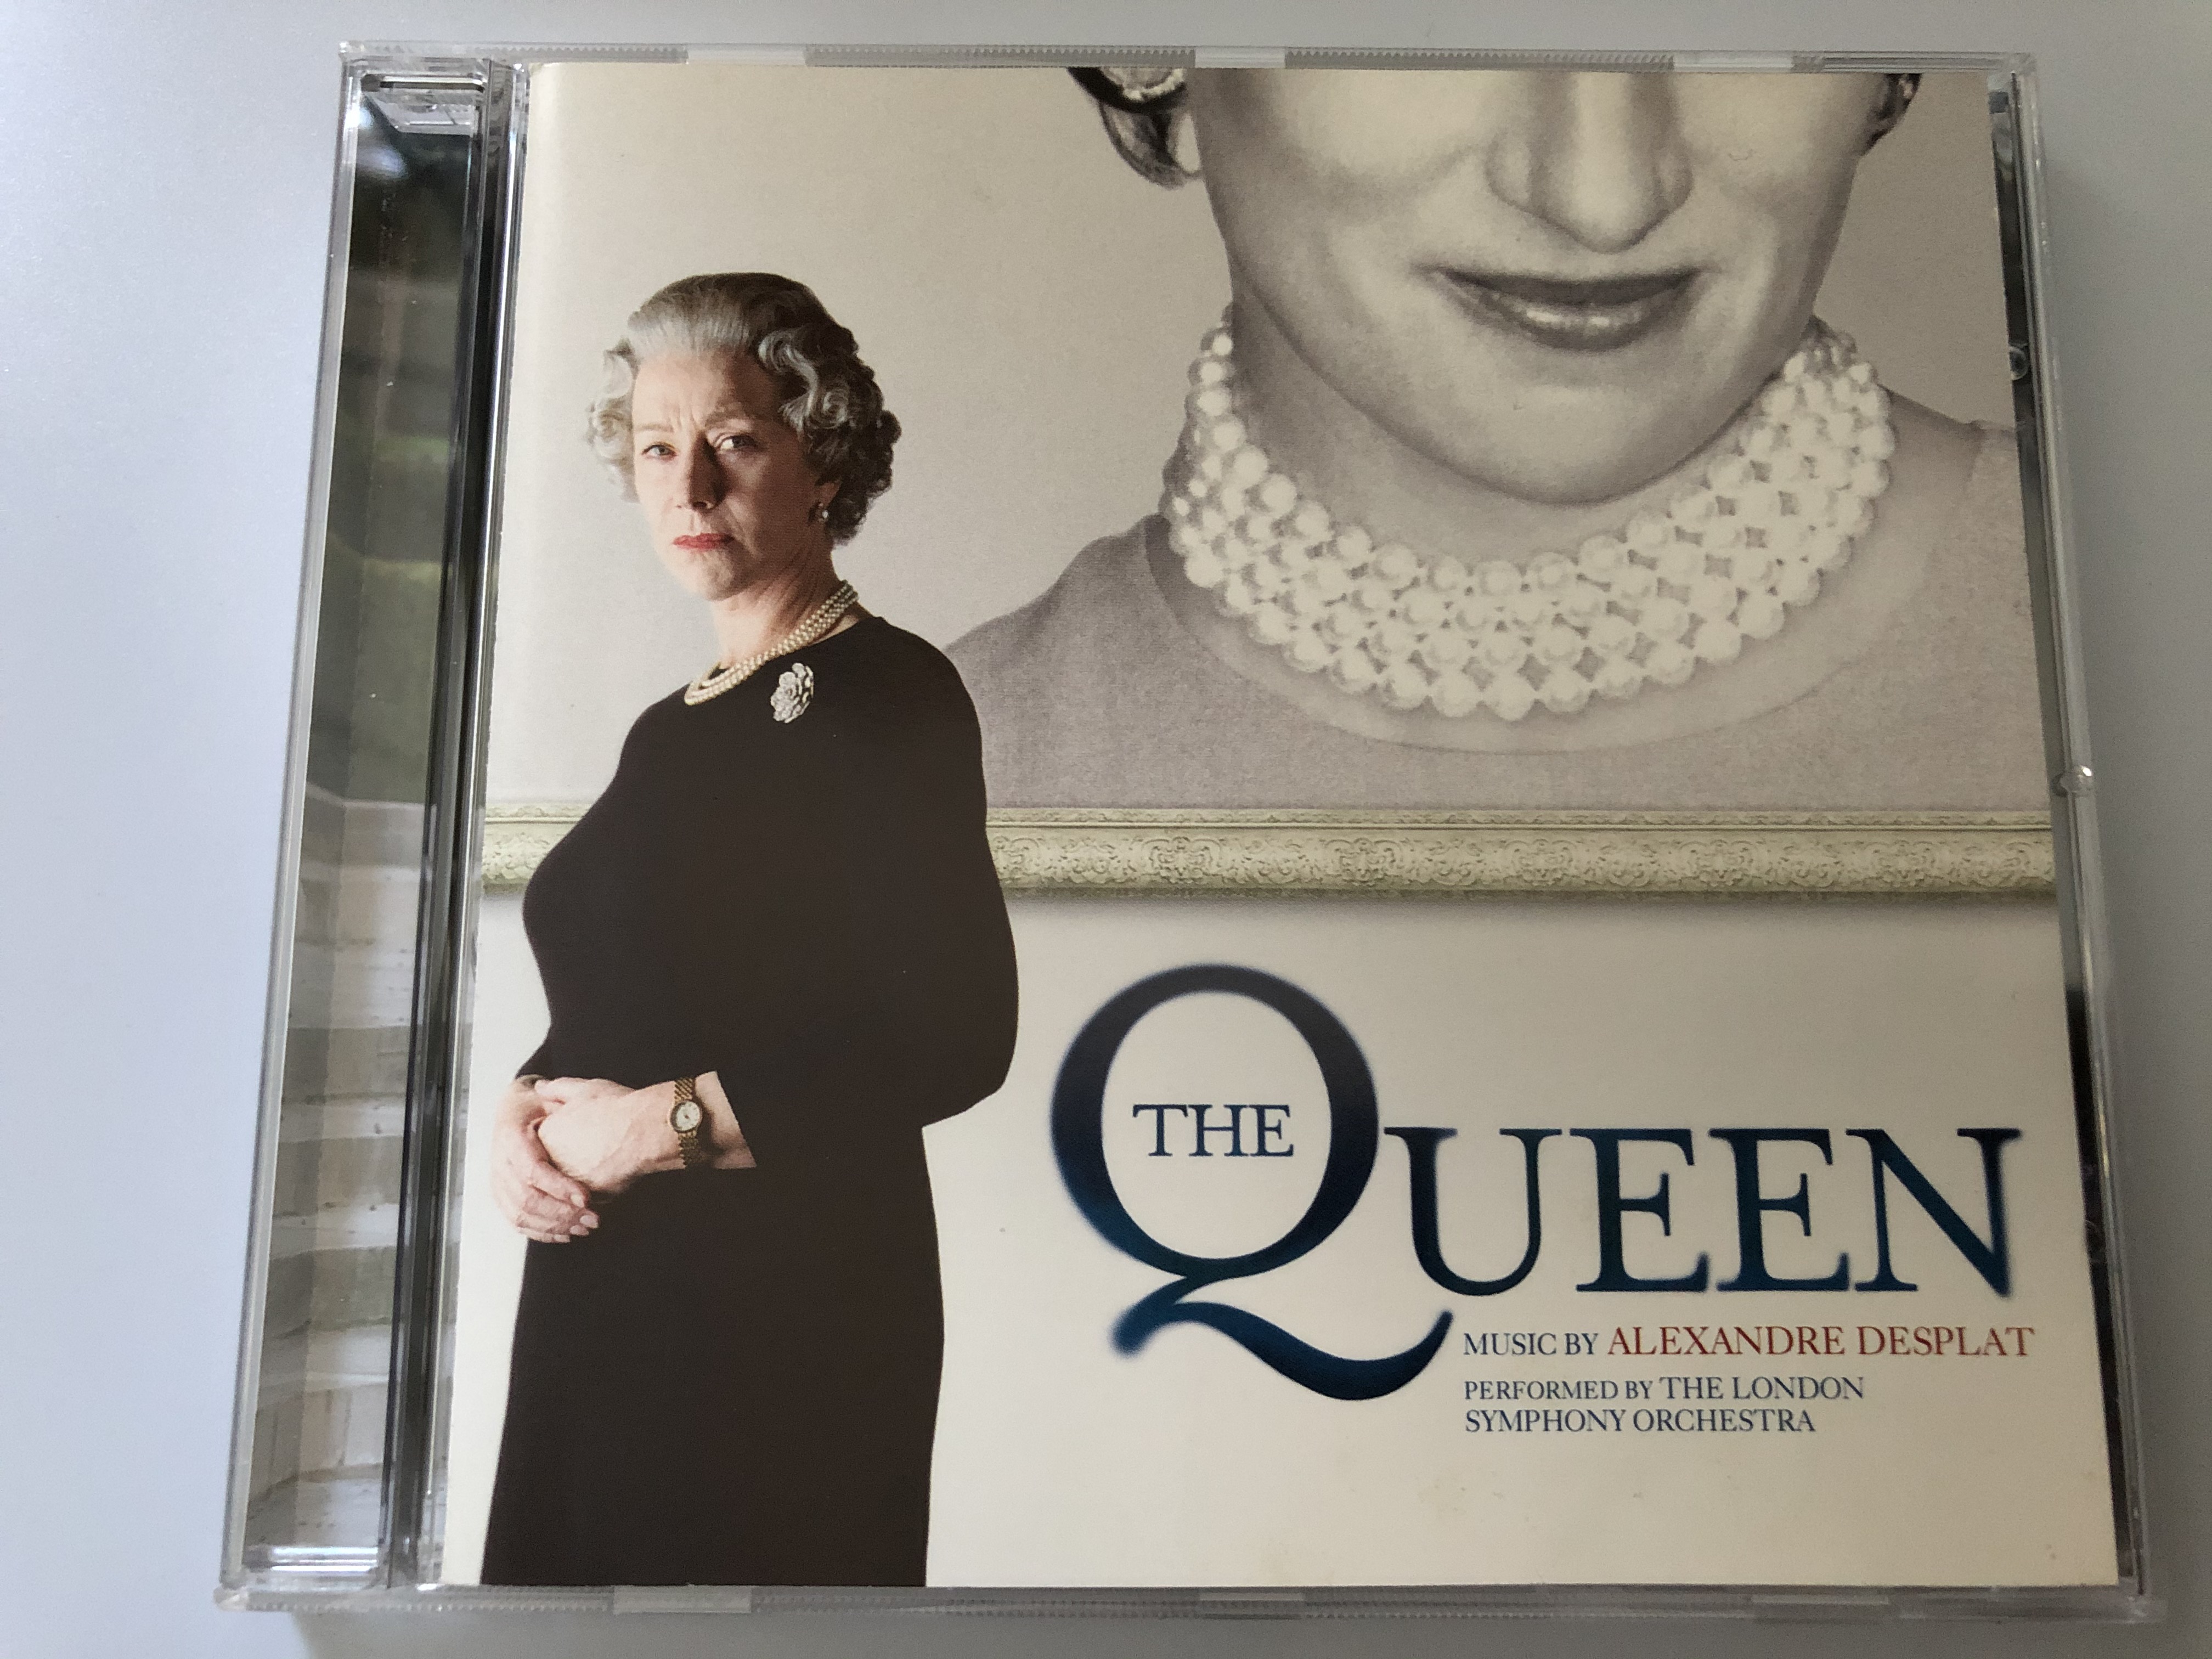 the-queen-music-by-alexandre-desplat-peformed-by-the-london-symphony-orchestra-milan-audio-cd-2006-399-050-2-1-.jpg